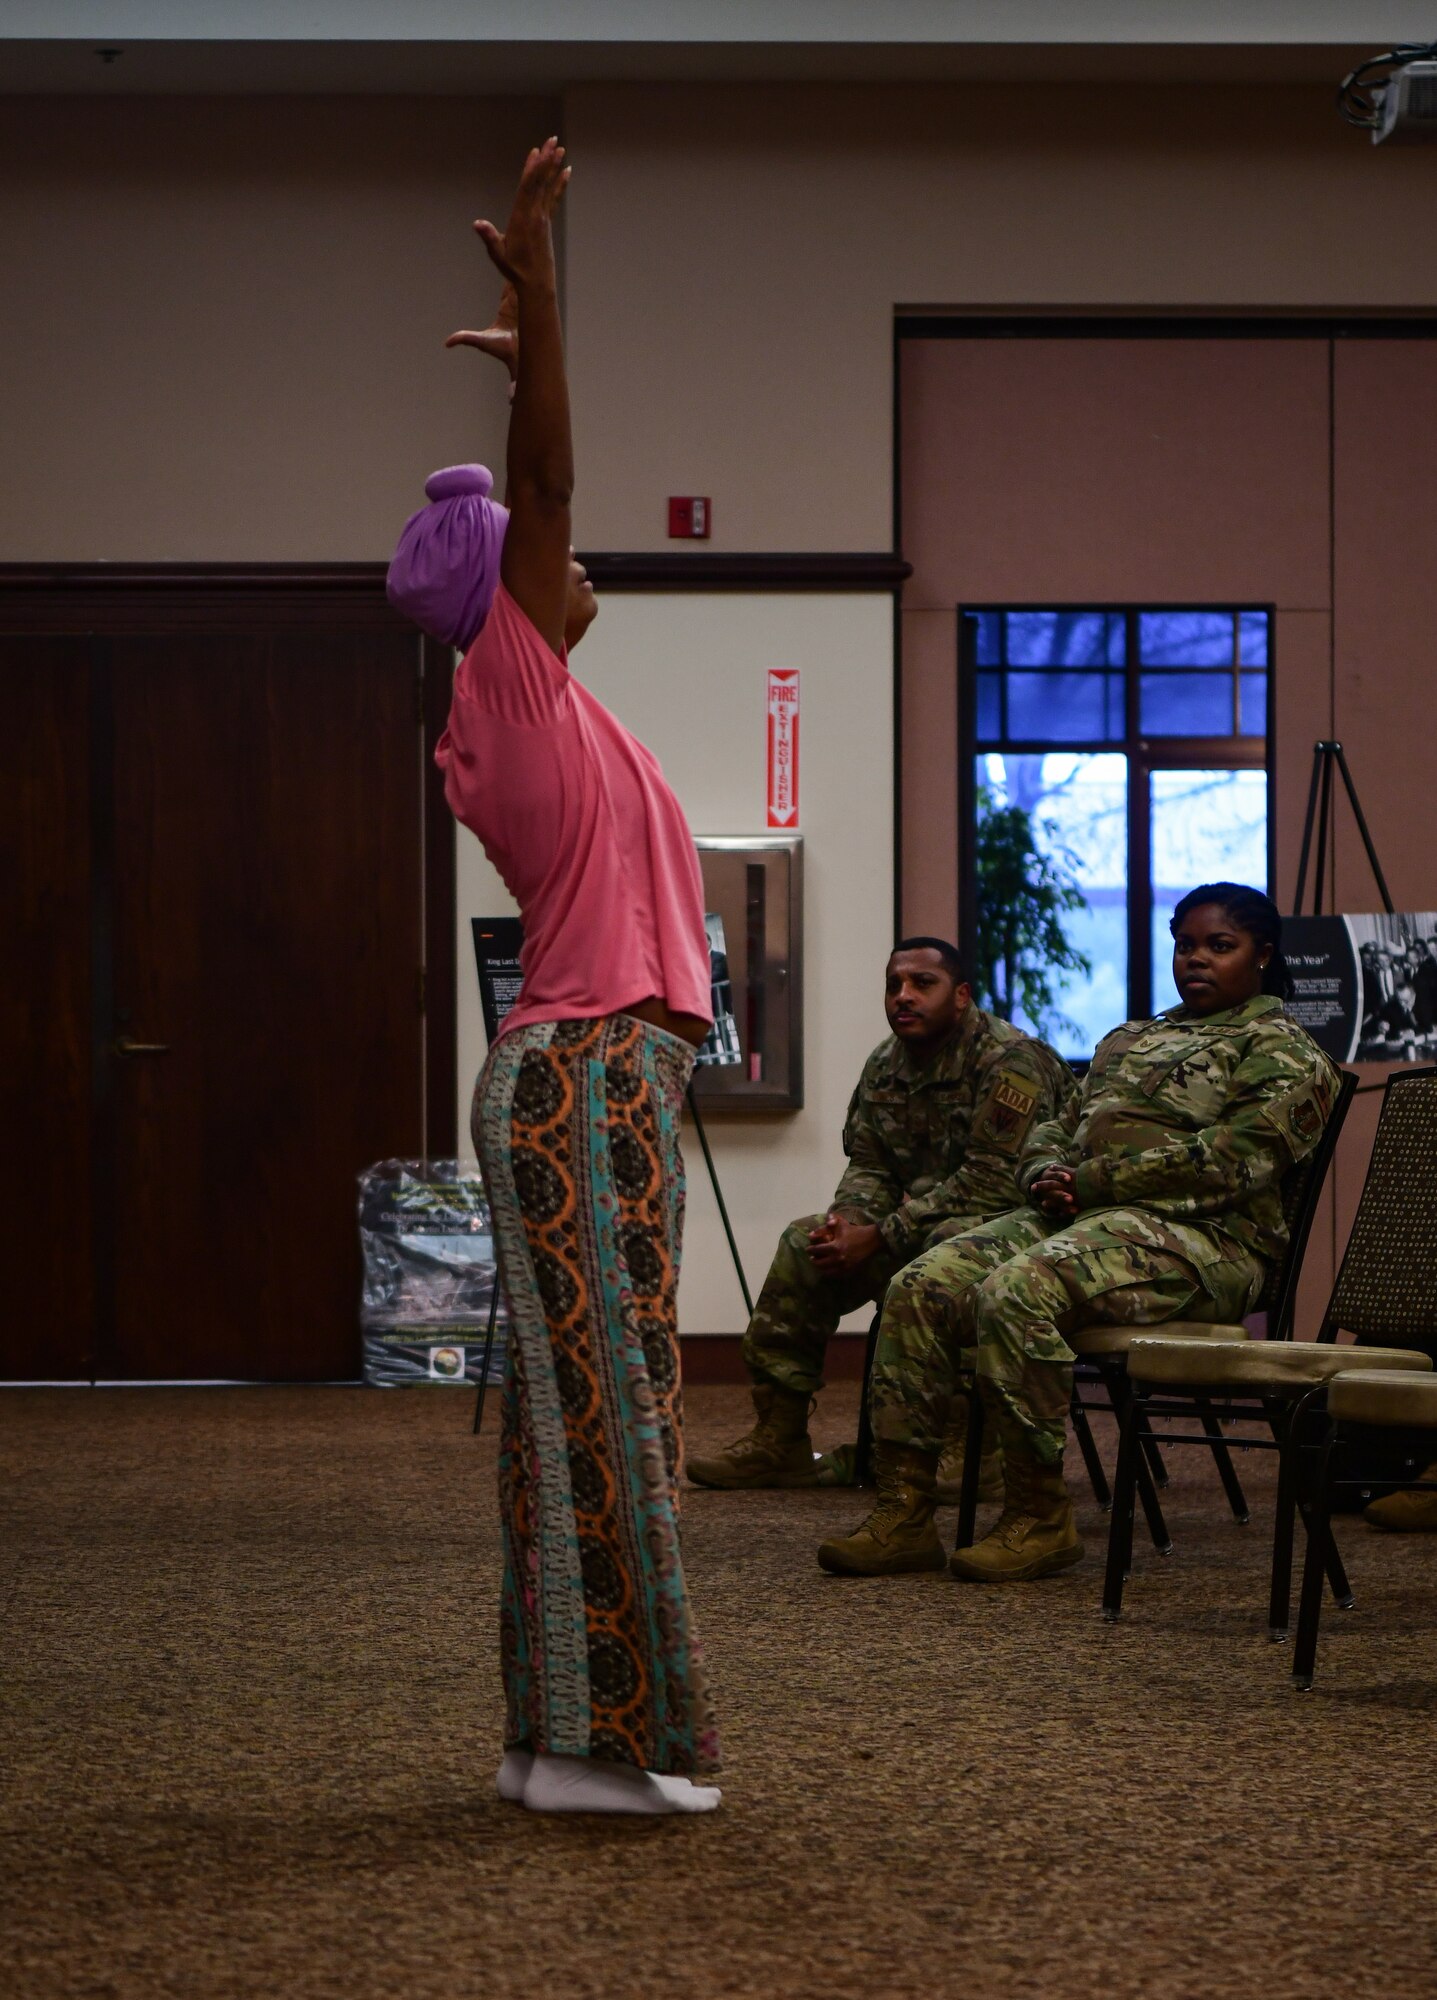 U.S. Air Force Tech. Sgt. Breona Calvert, 195th Intelligence Surveillance Reconnaissance Group personnel, performs a dance at the Recce Point Club on Beale Air Force Base on Jan 13, 2023.